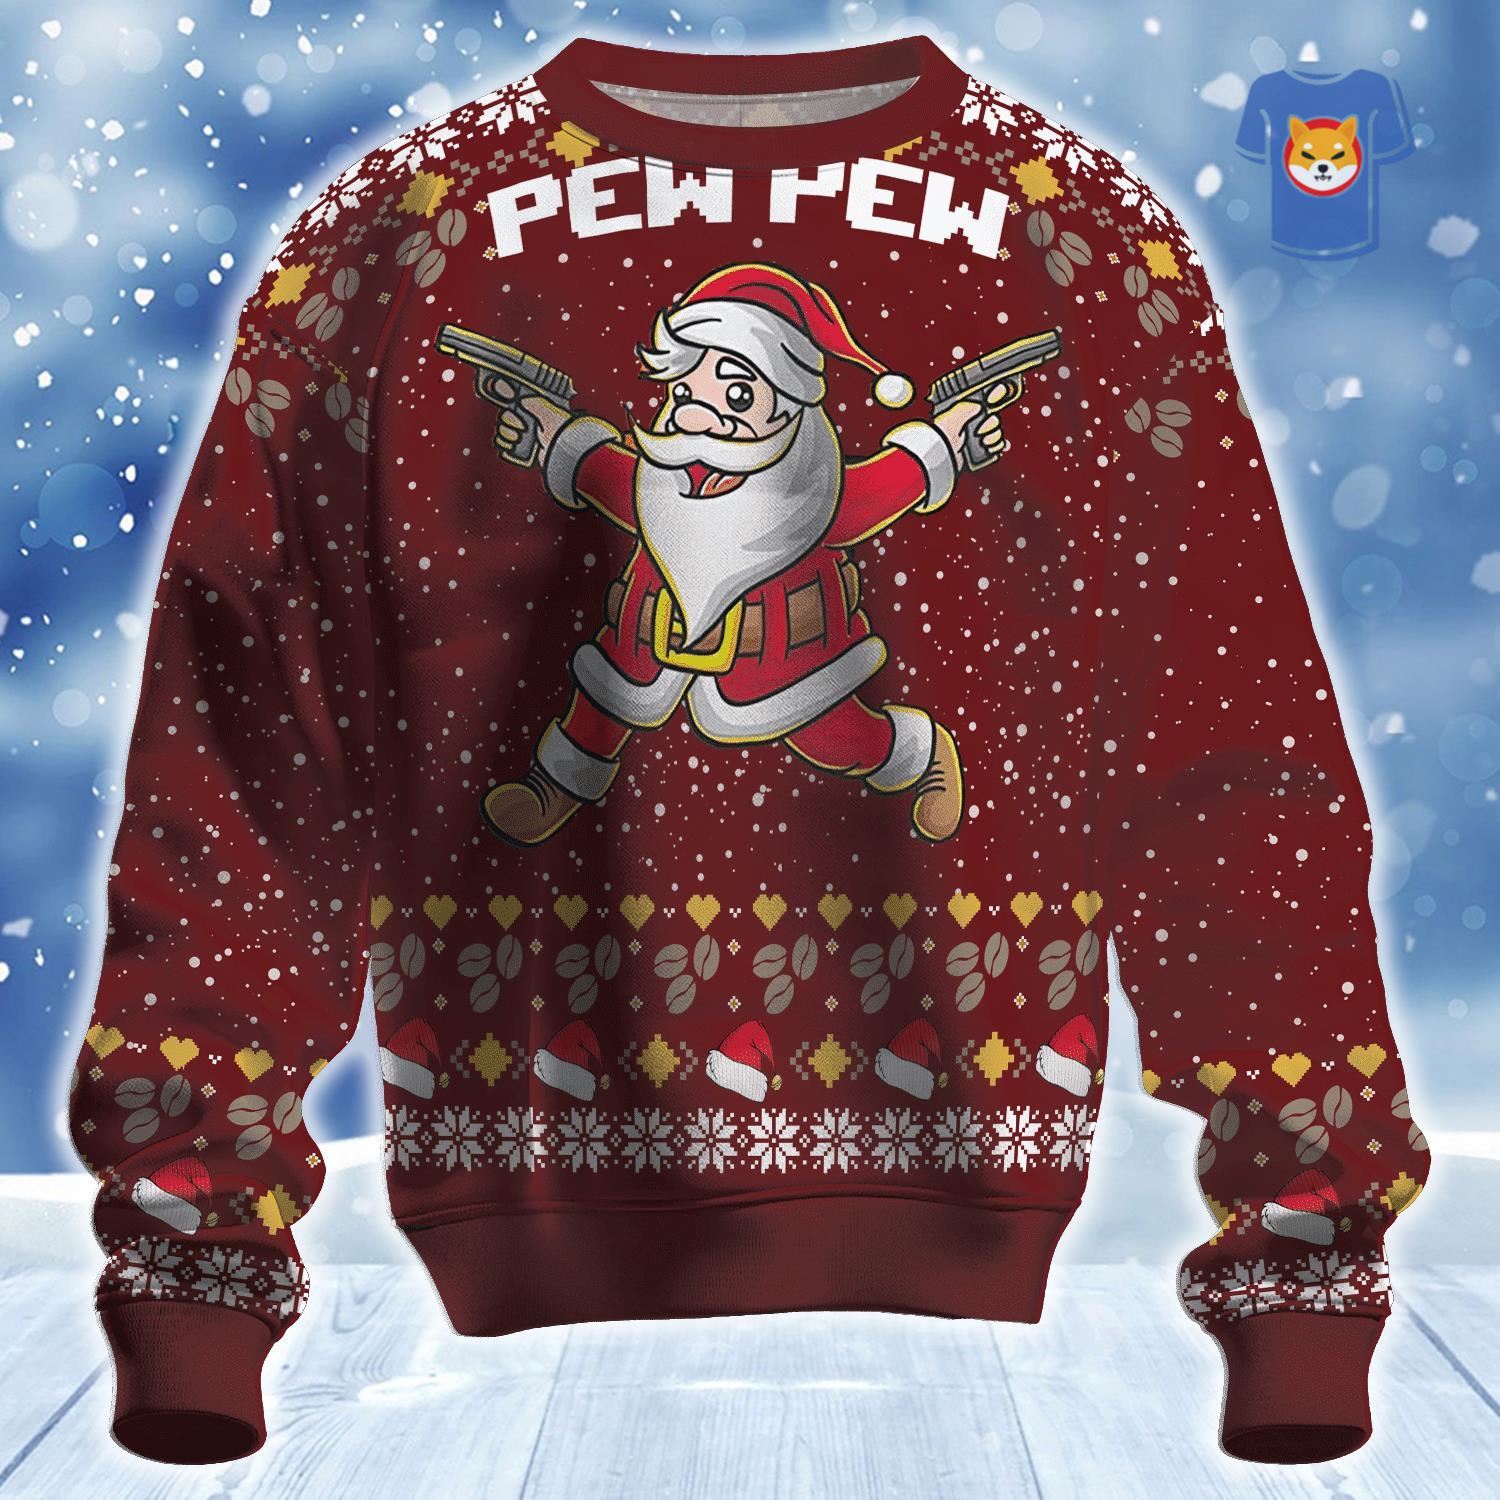 Pew Pew Ugly Christmas Sweater 